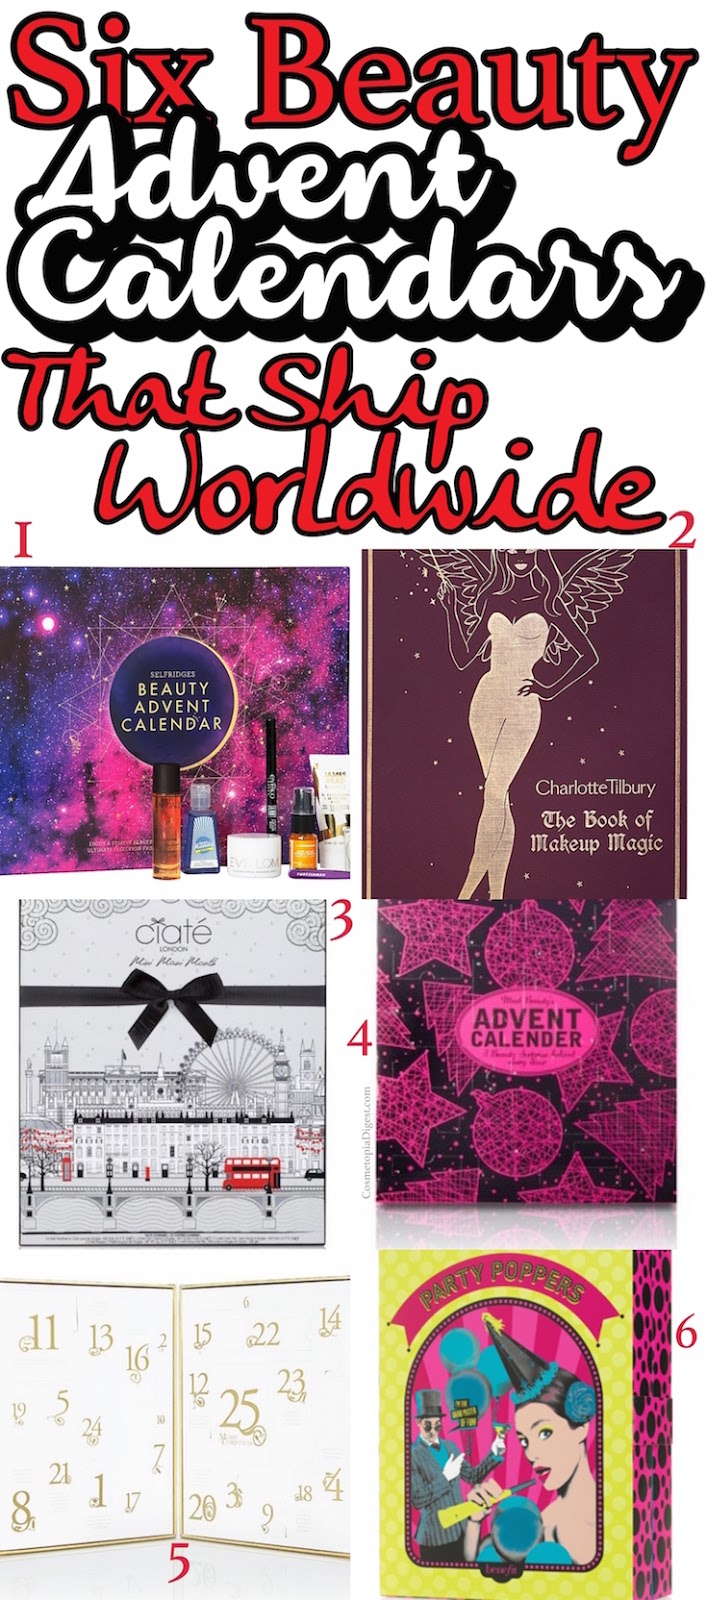 A list of six beauty advent calendars that ship worldwide in 2015.